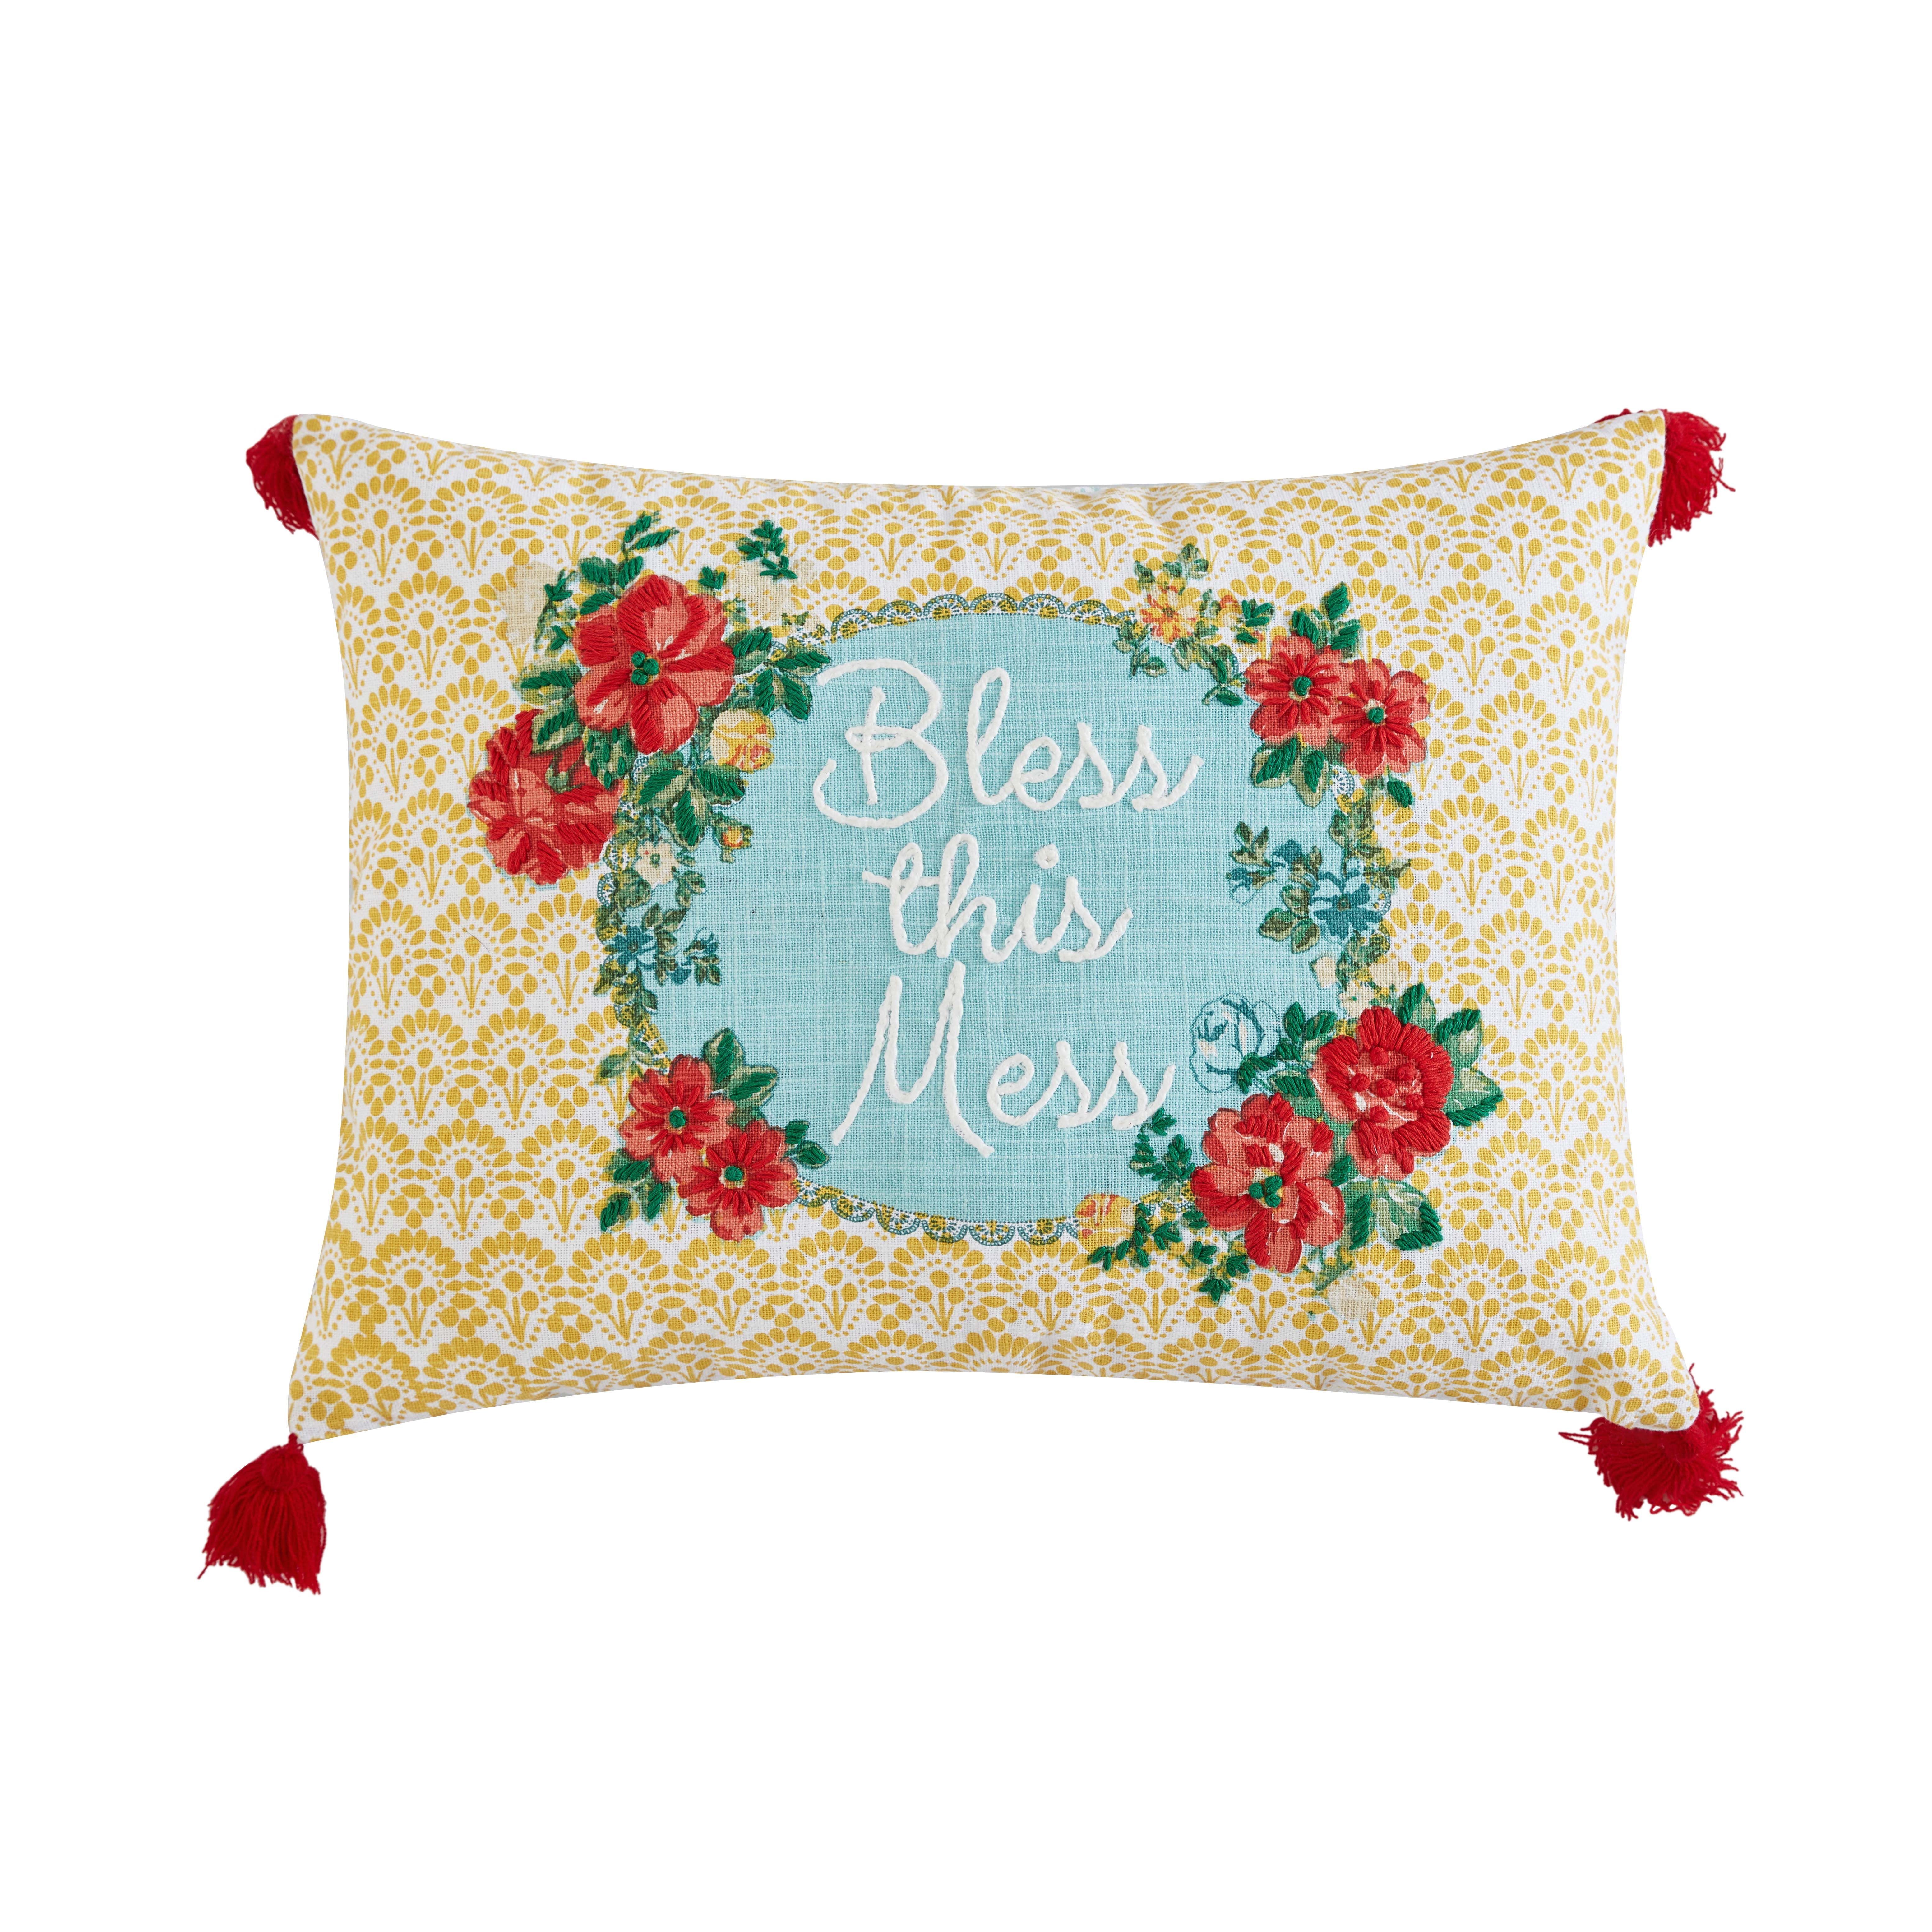 The Pioneer Woman 'Bless This Mess' Decorative Pillow